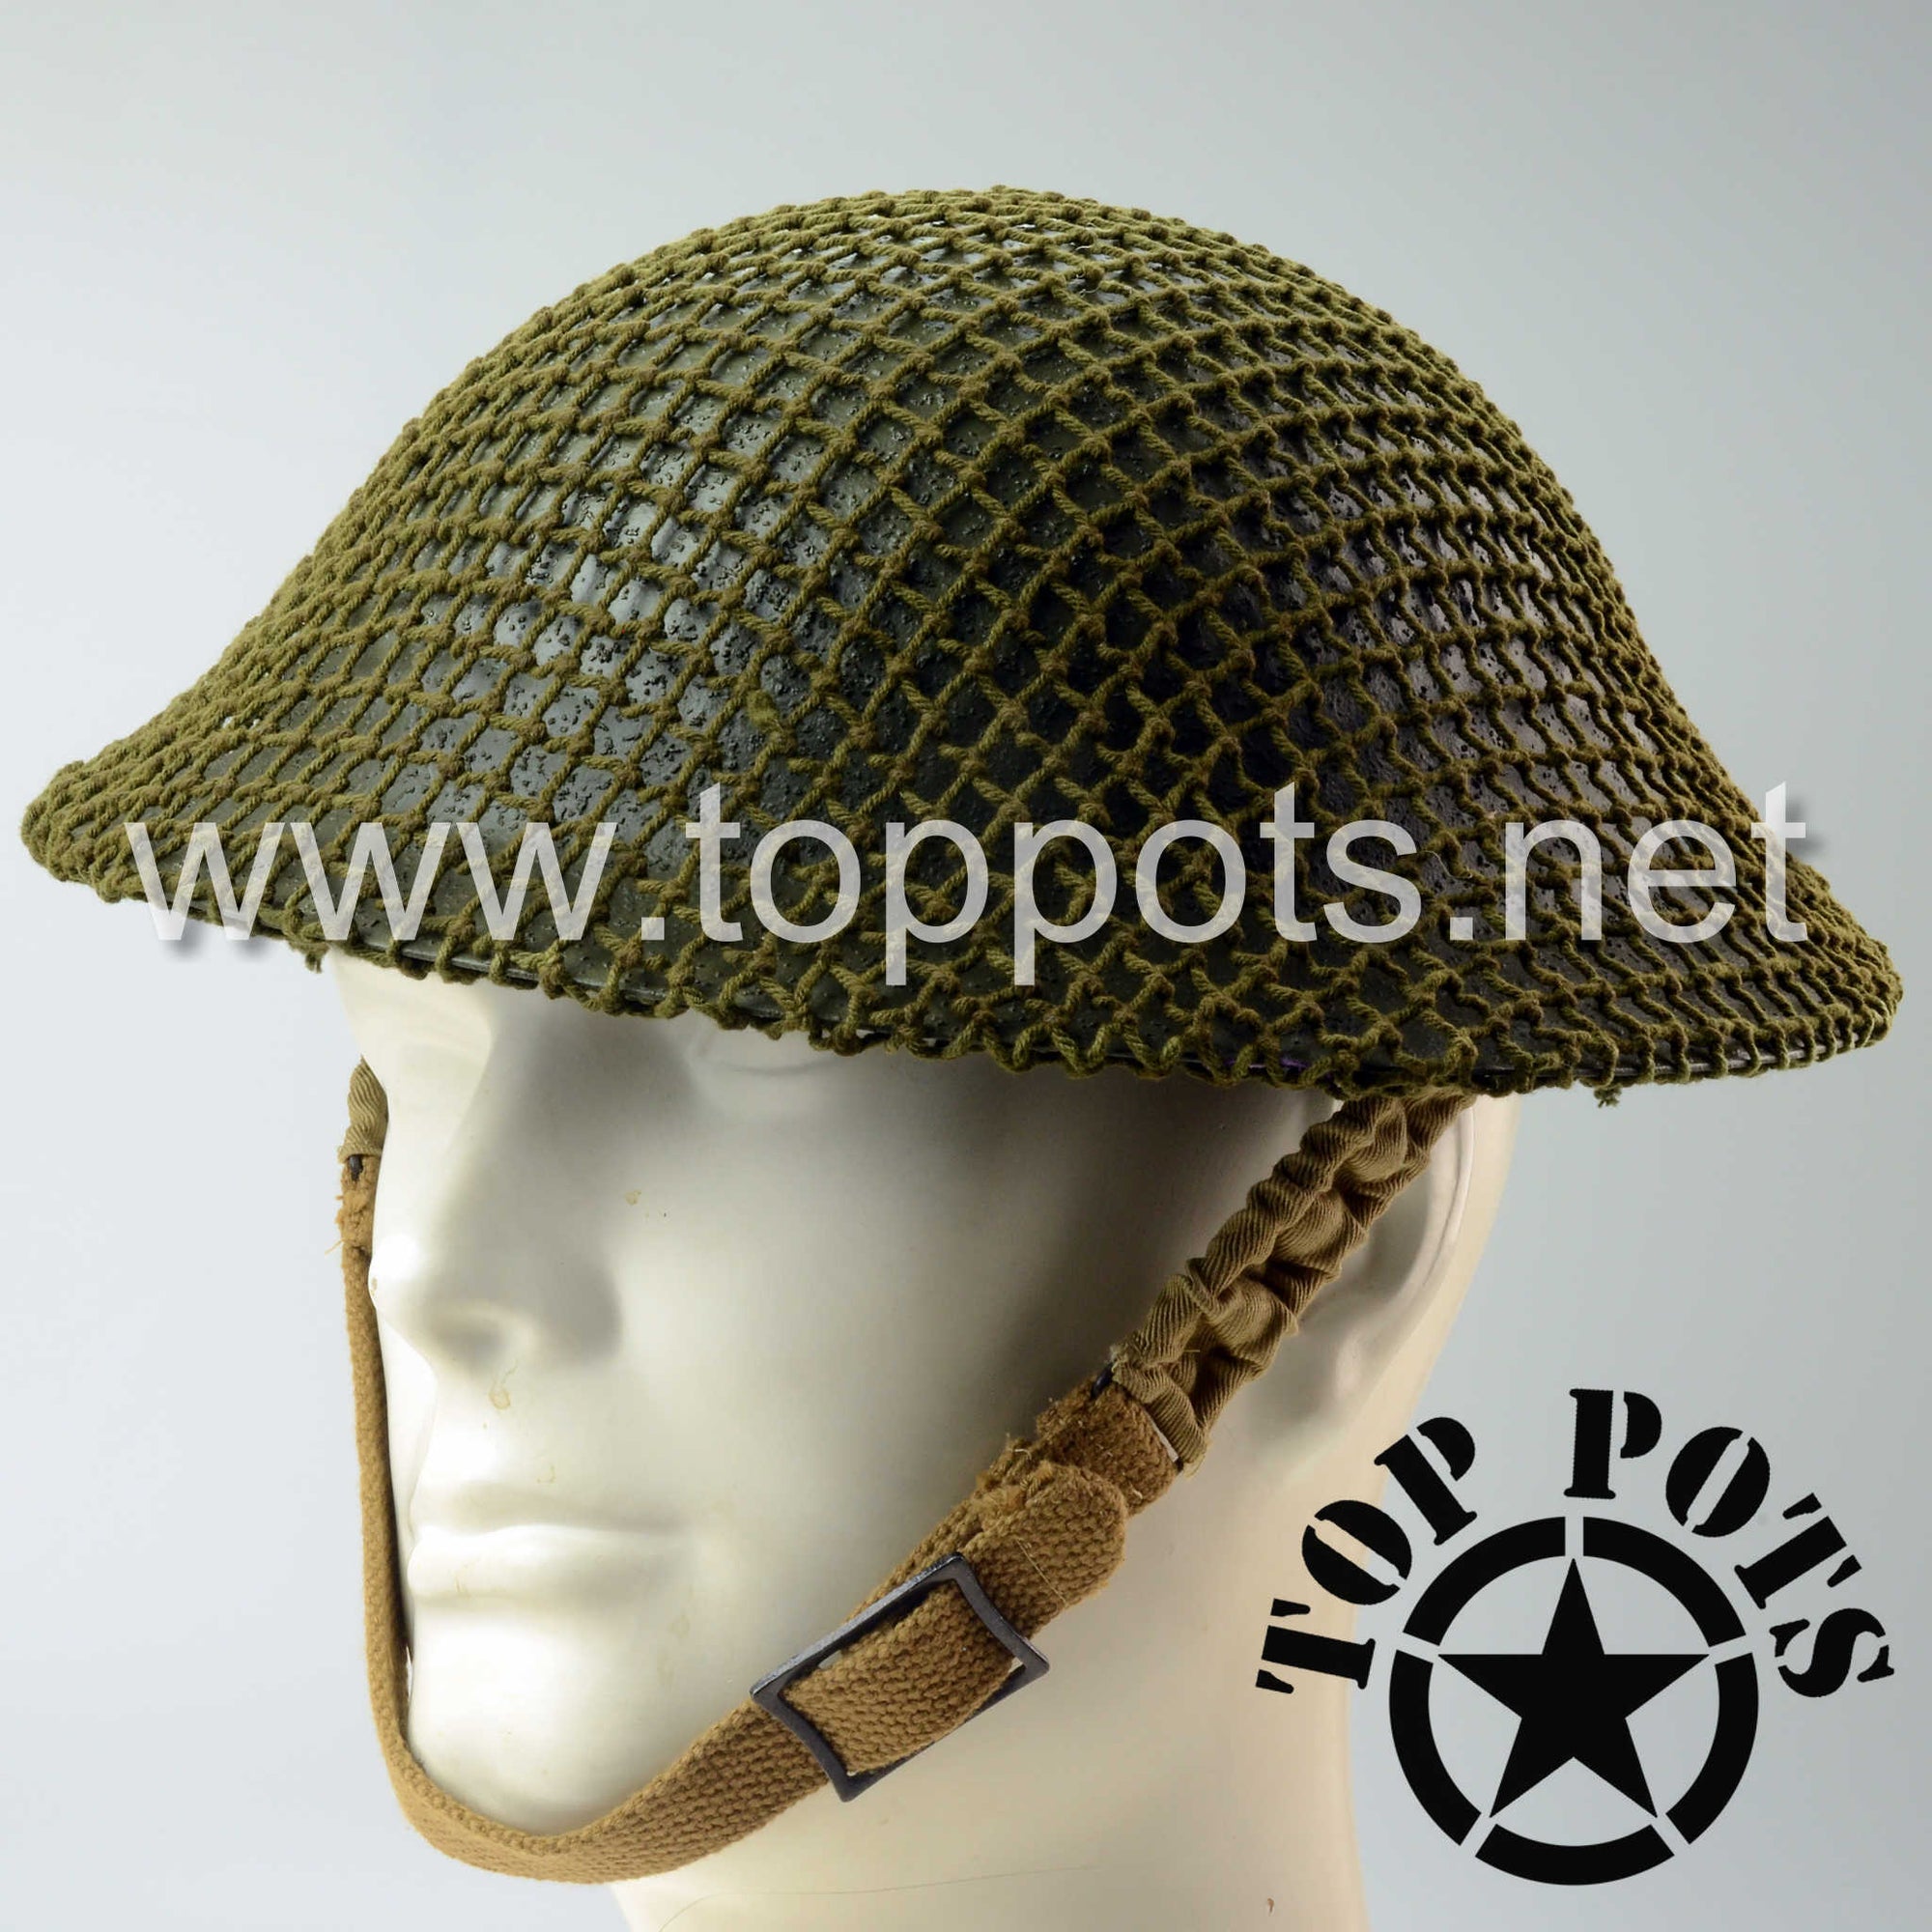 WWII Canadian Army Reproduction MKII MK2 Enlisted Brodie Helmet with Original Helmet Net – Field Textured Finish